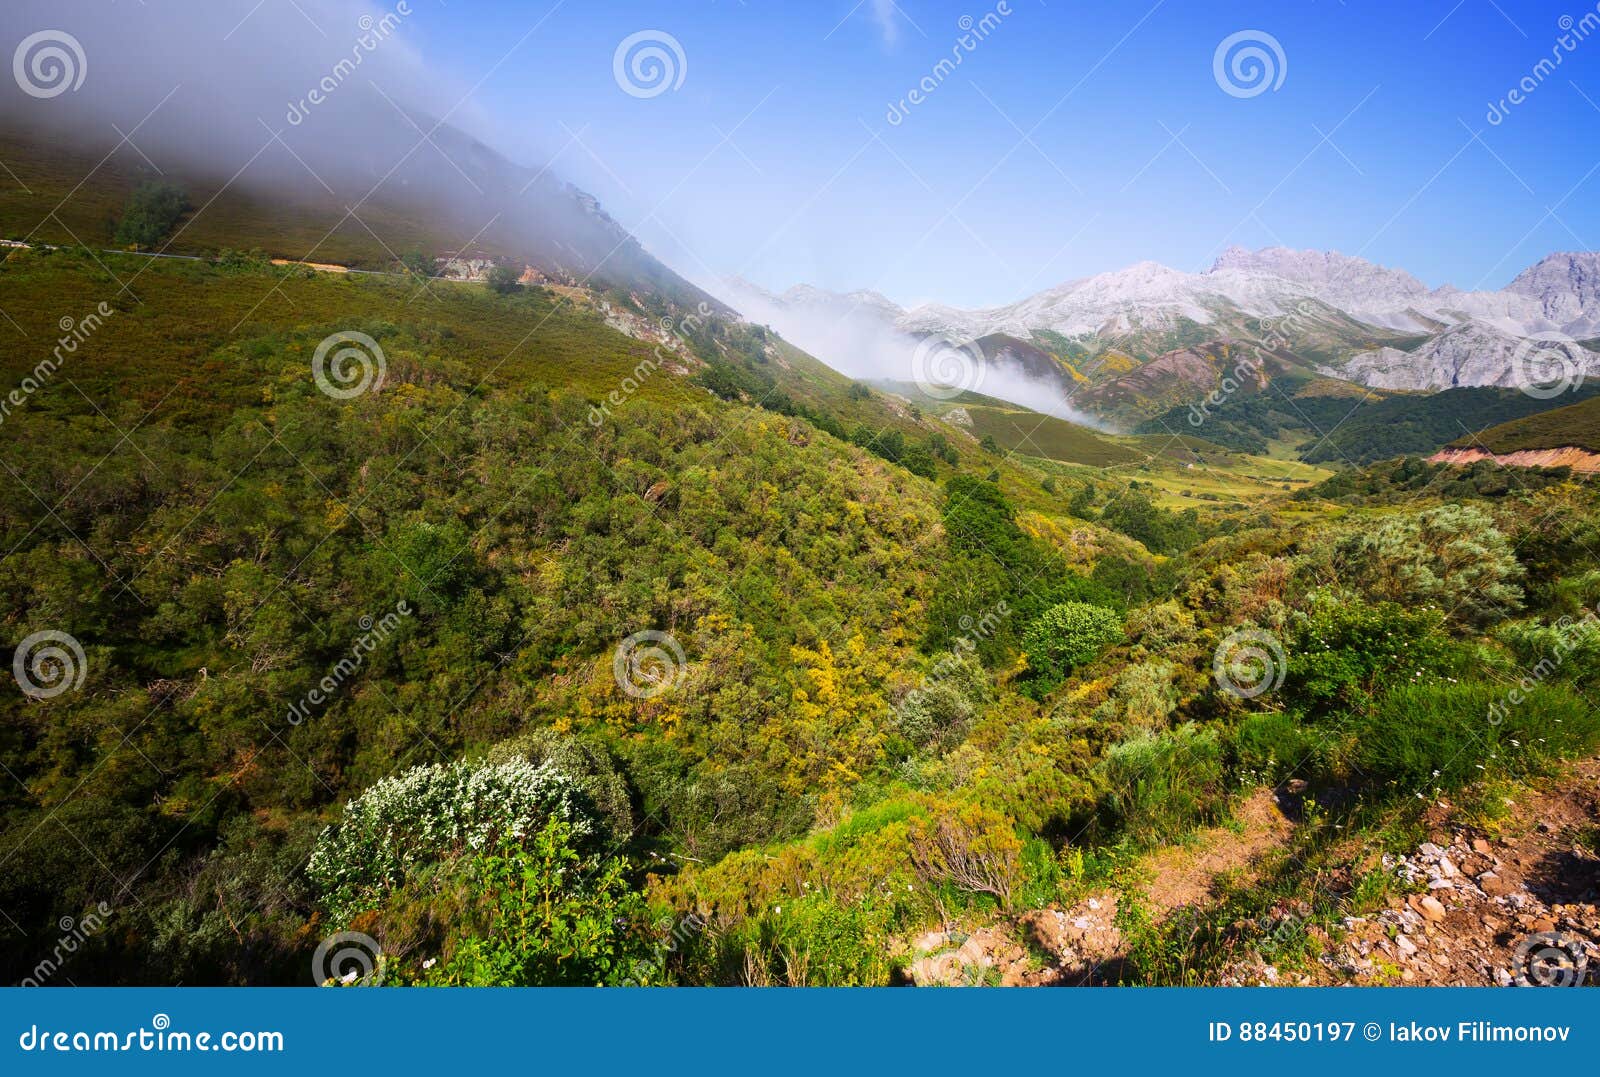 mountain landscape with fog in summe